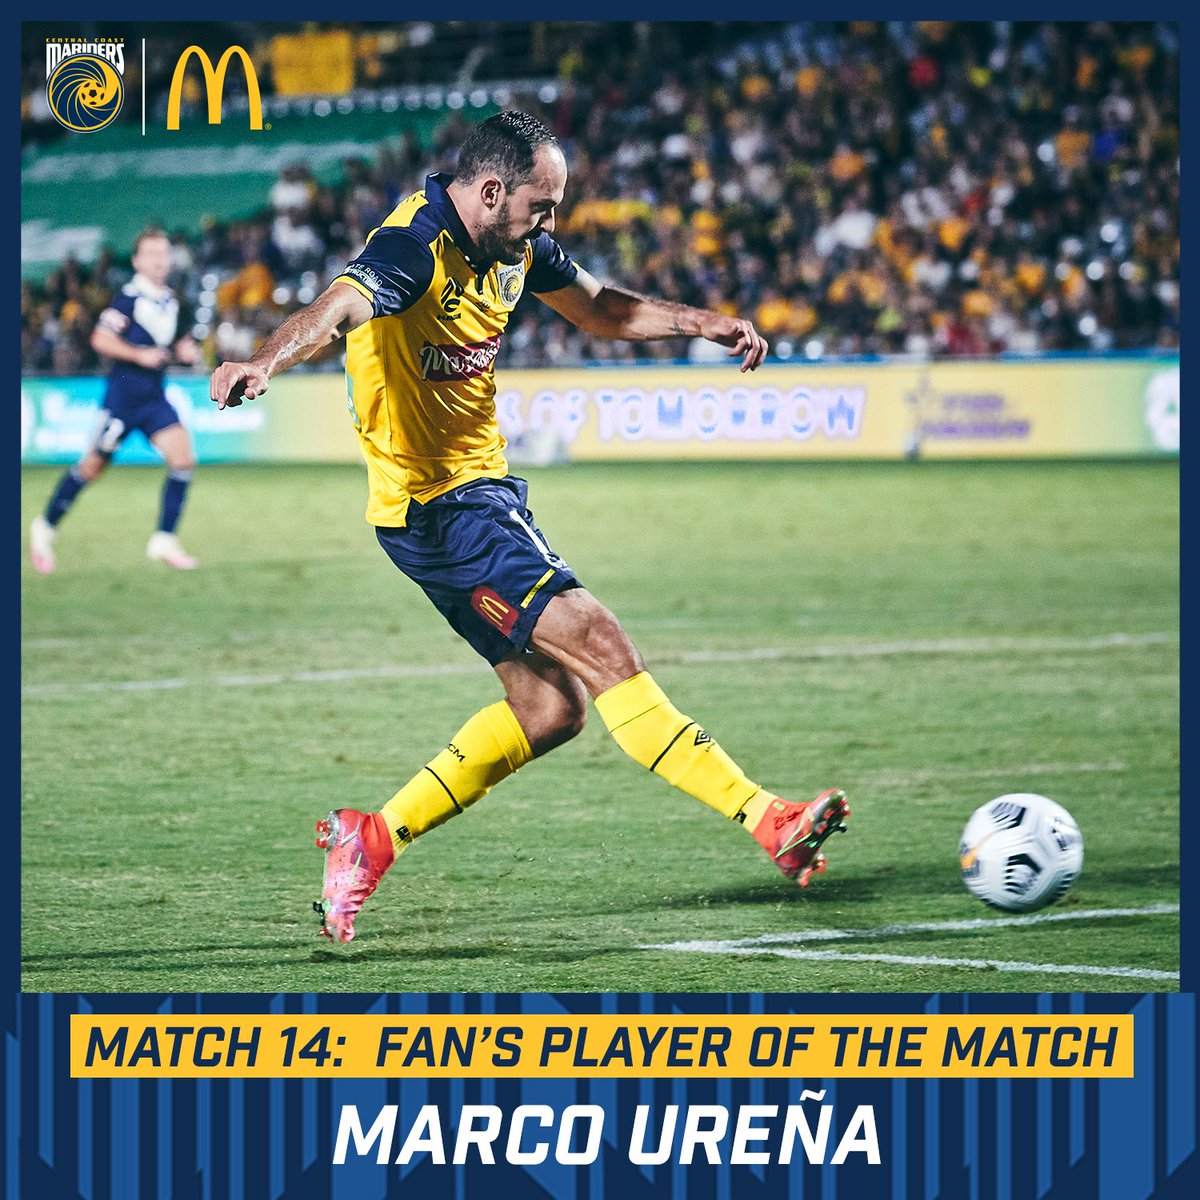 A third goal of the season and the @maccas Fan's Player of the Match award for @MarcoUrenaCR! #CCMFC #CCMvMVC #WontBackDown